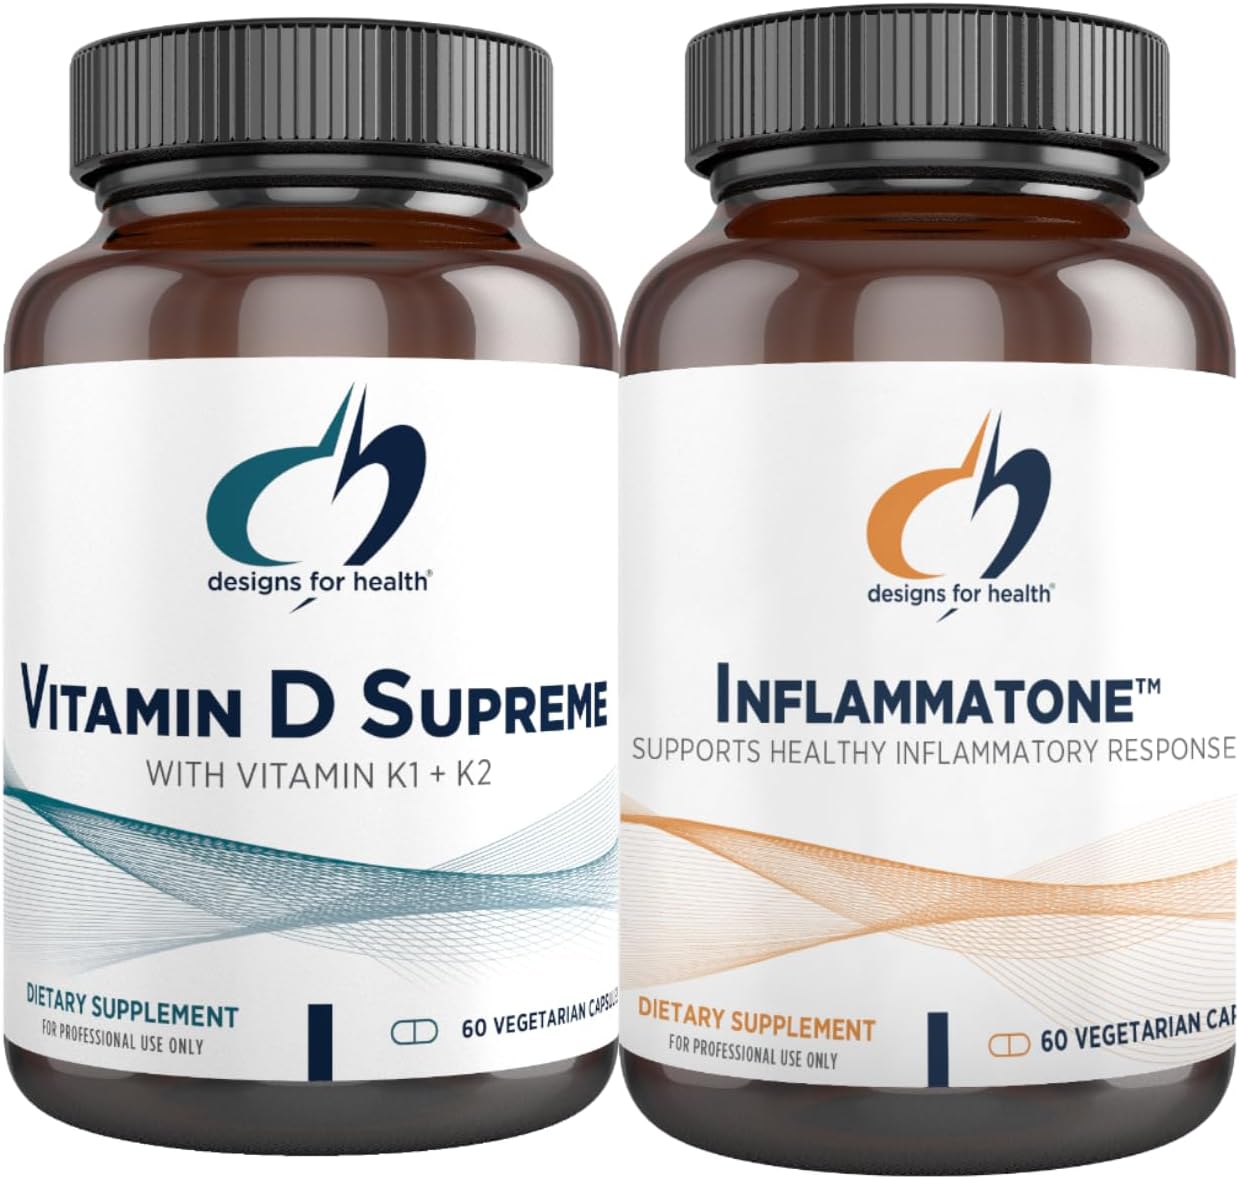 Designs for Health Vitamin D Supreme + Inflammatone Bundle - Vitamin D3 5000 IU + 2000mcg Vitamin K with an Enzyme Botanical Blend to Promote Healthy Inflammatory Response - 2 Products